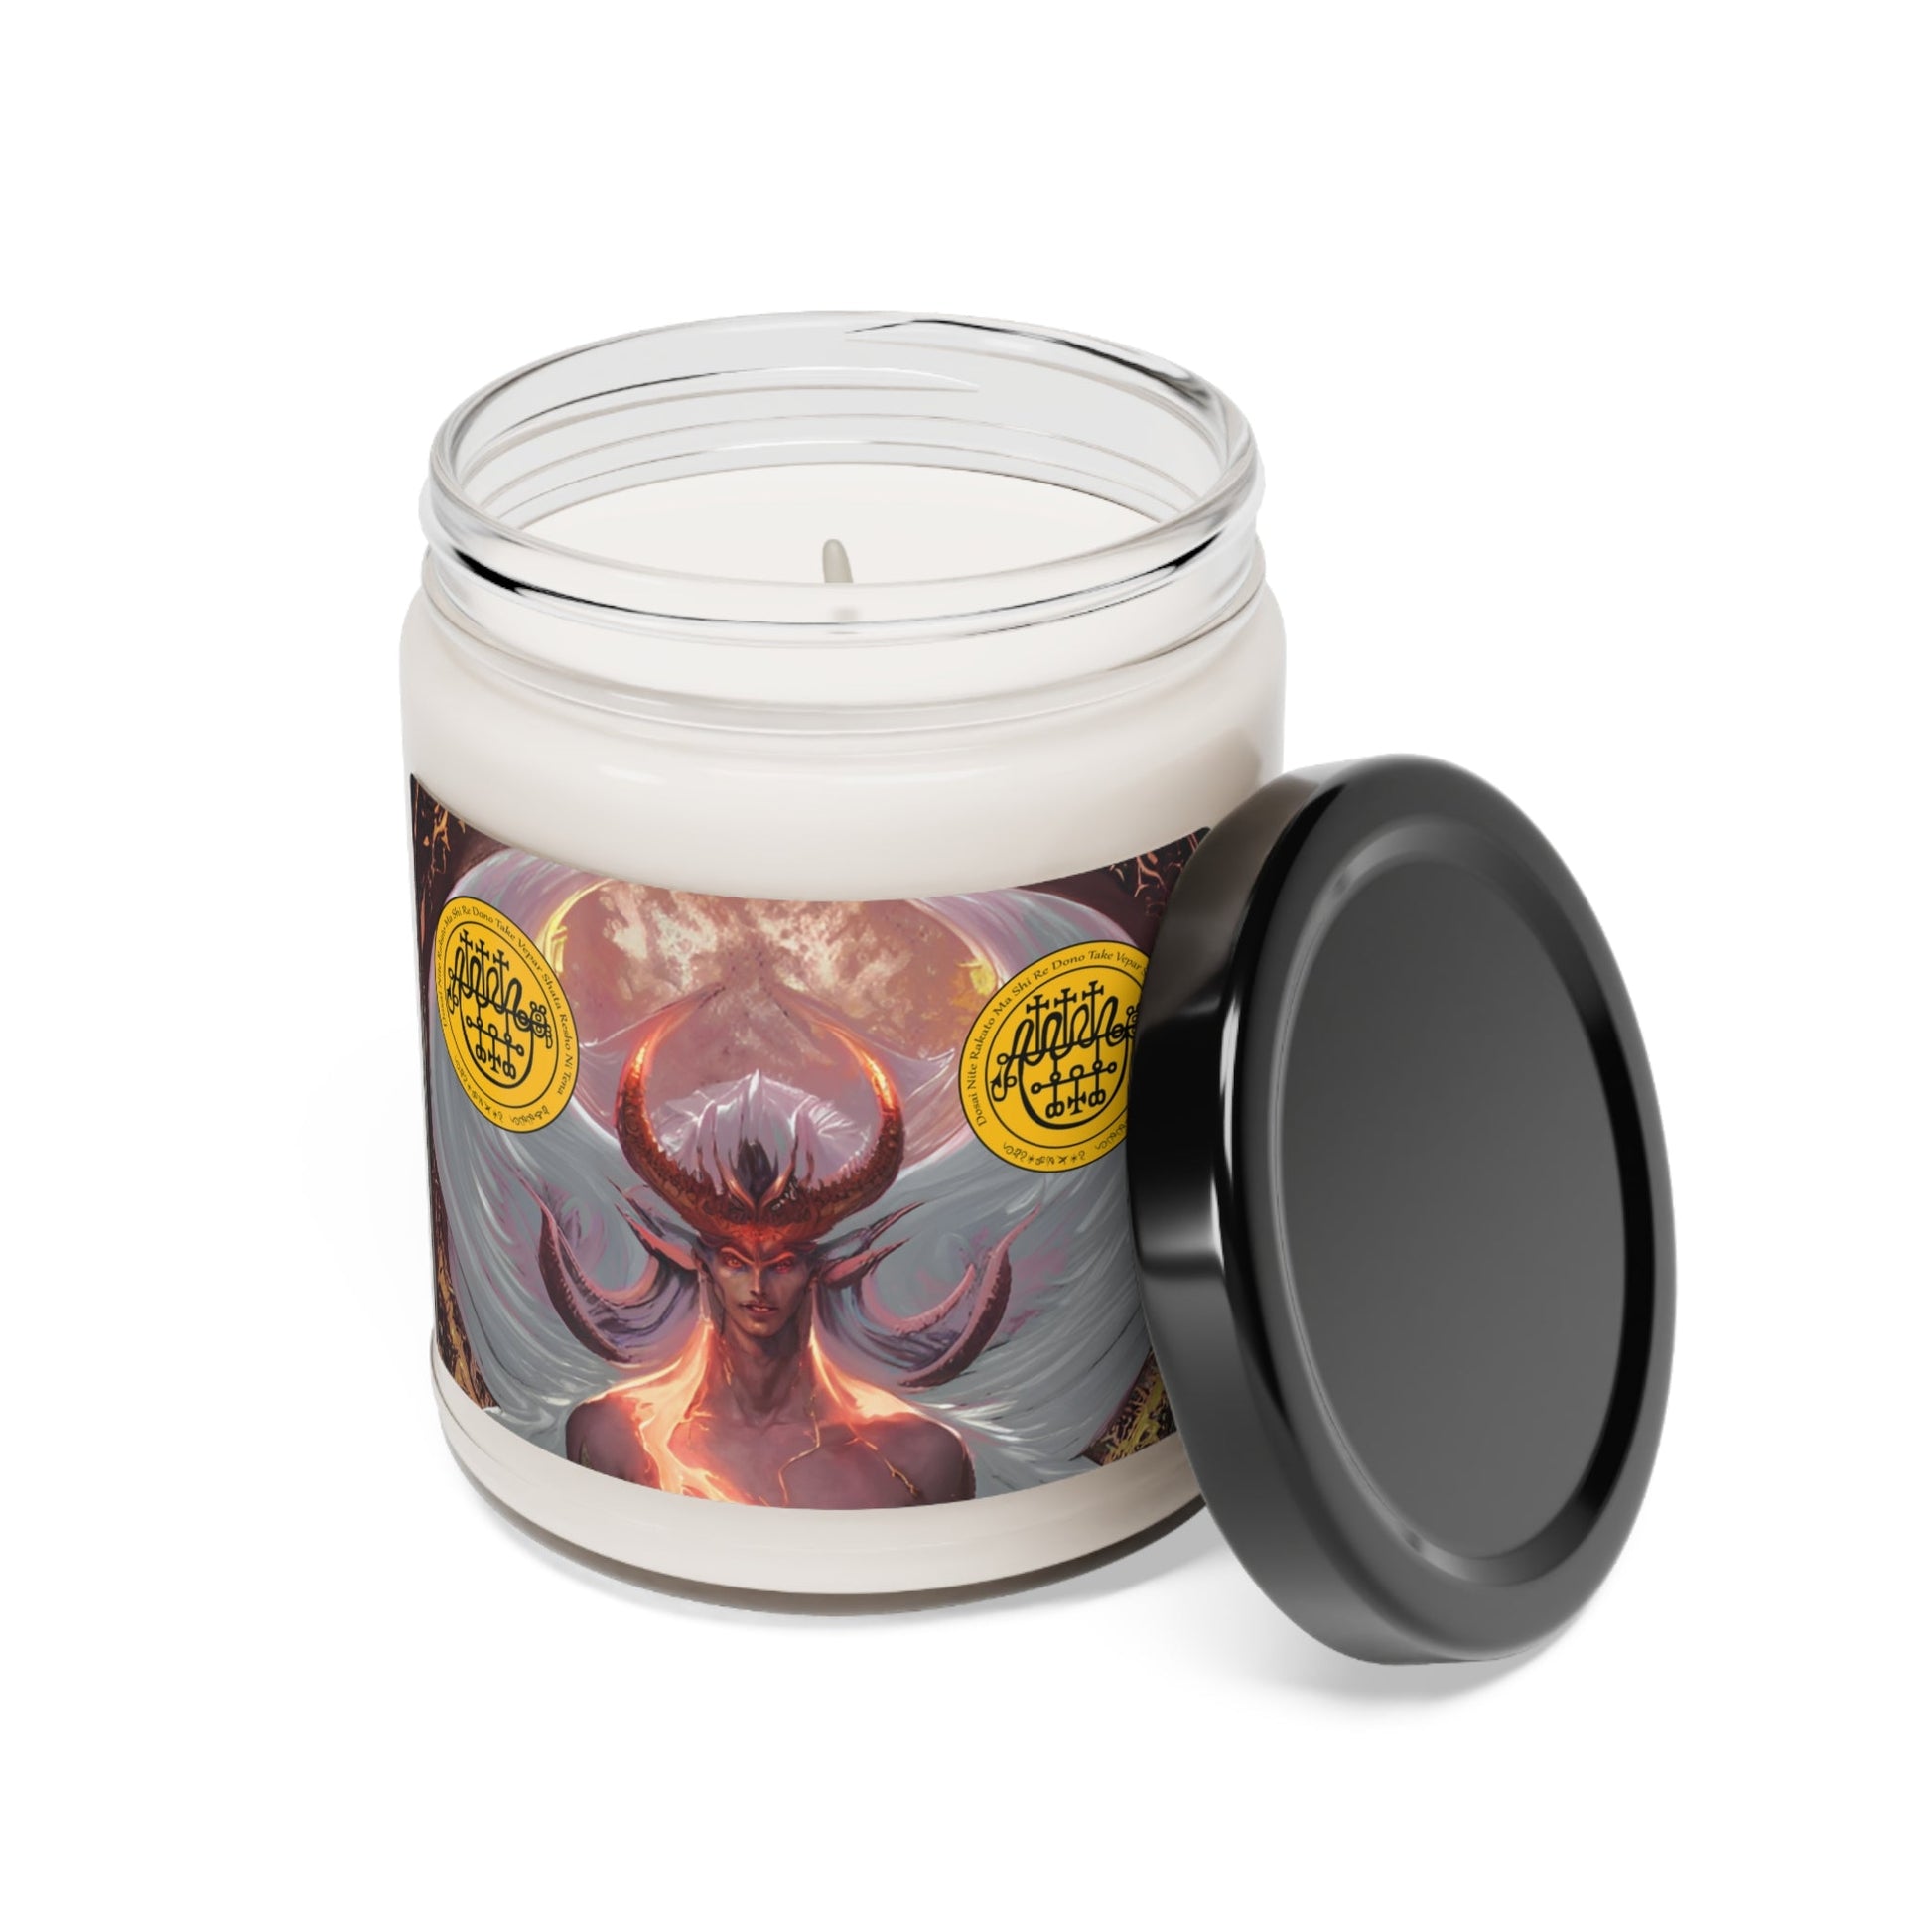 Demon-Vepar-Altar-Scented-Soy-Candle-for-offerings-rituals-initiations-o-praying-and-medtation-17